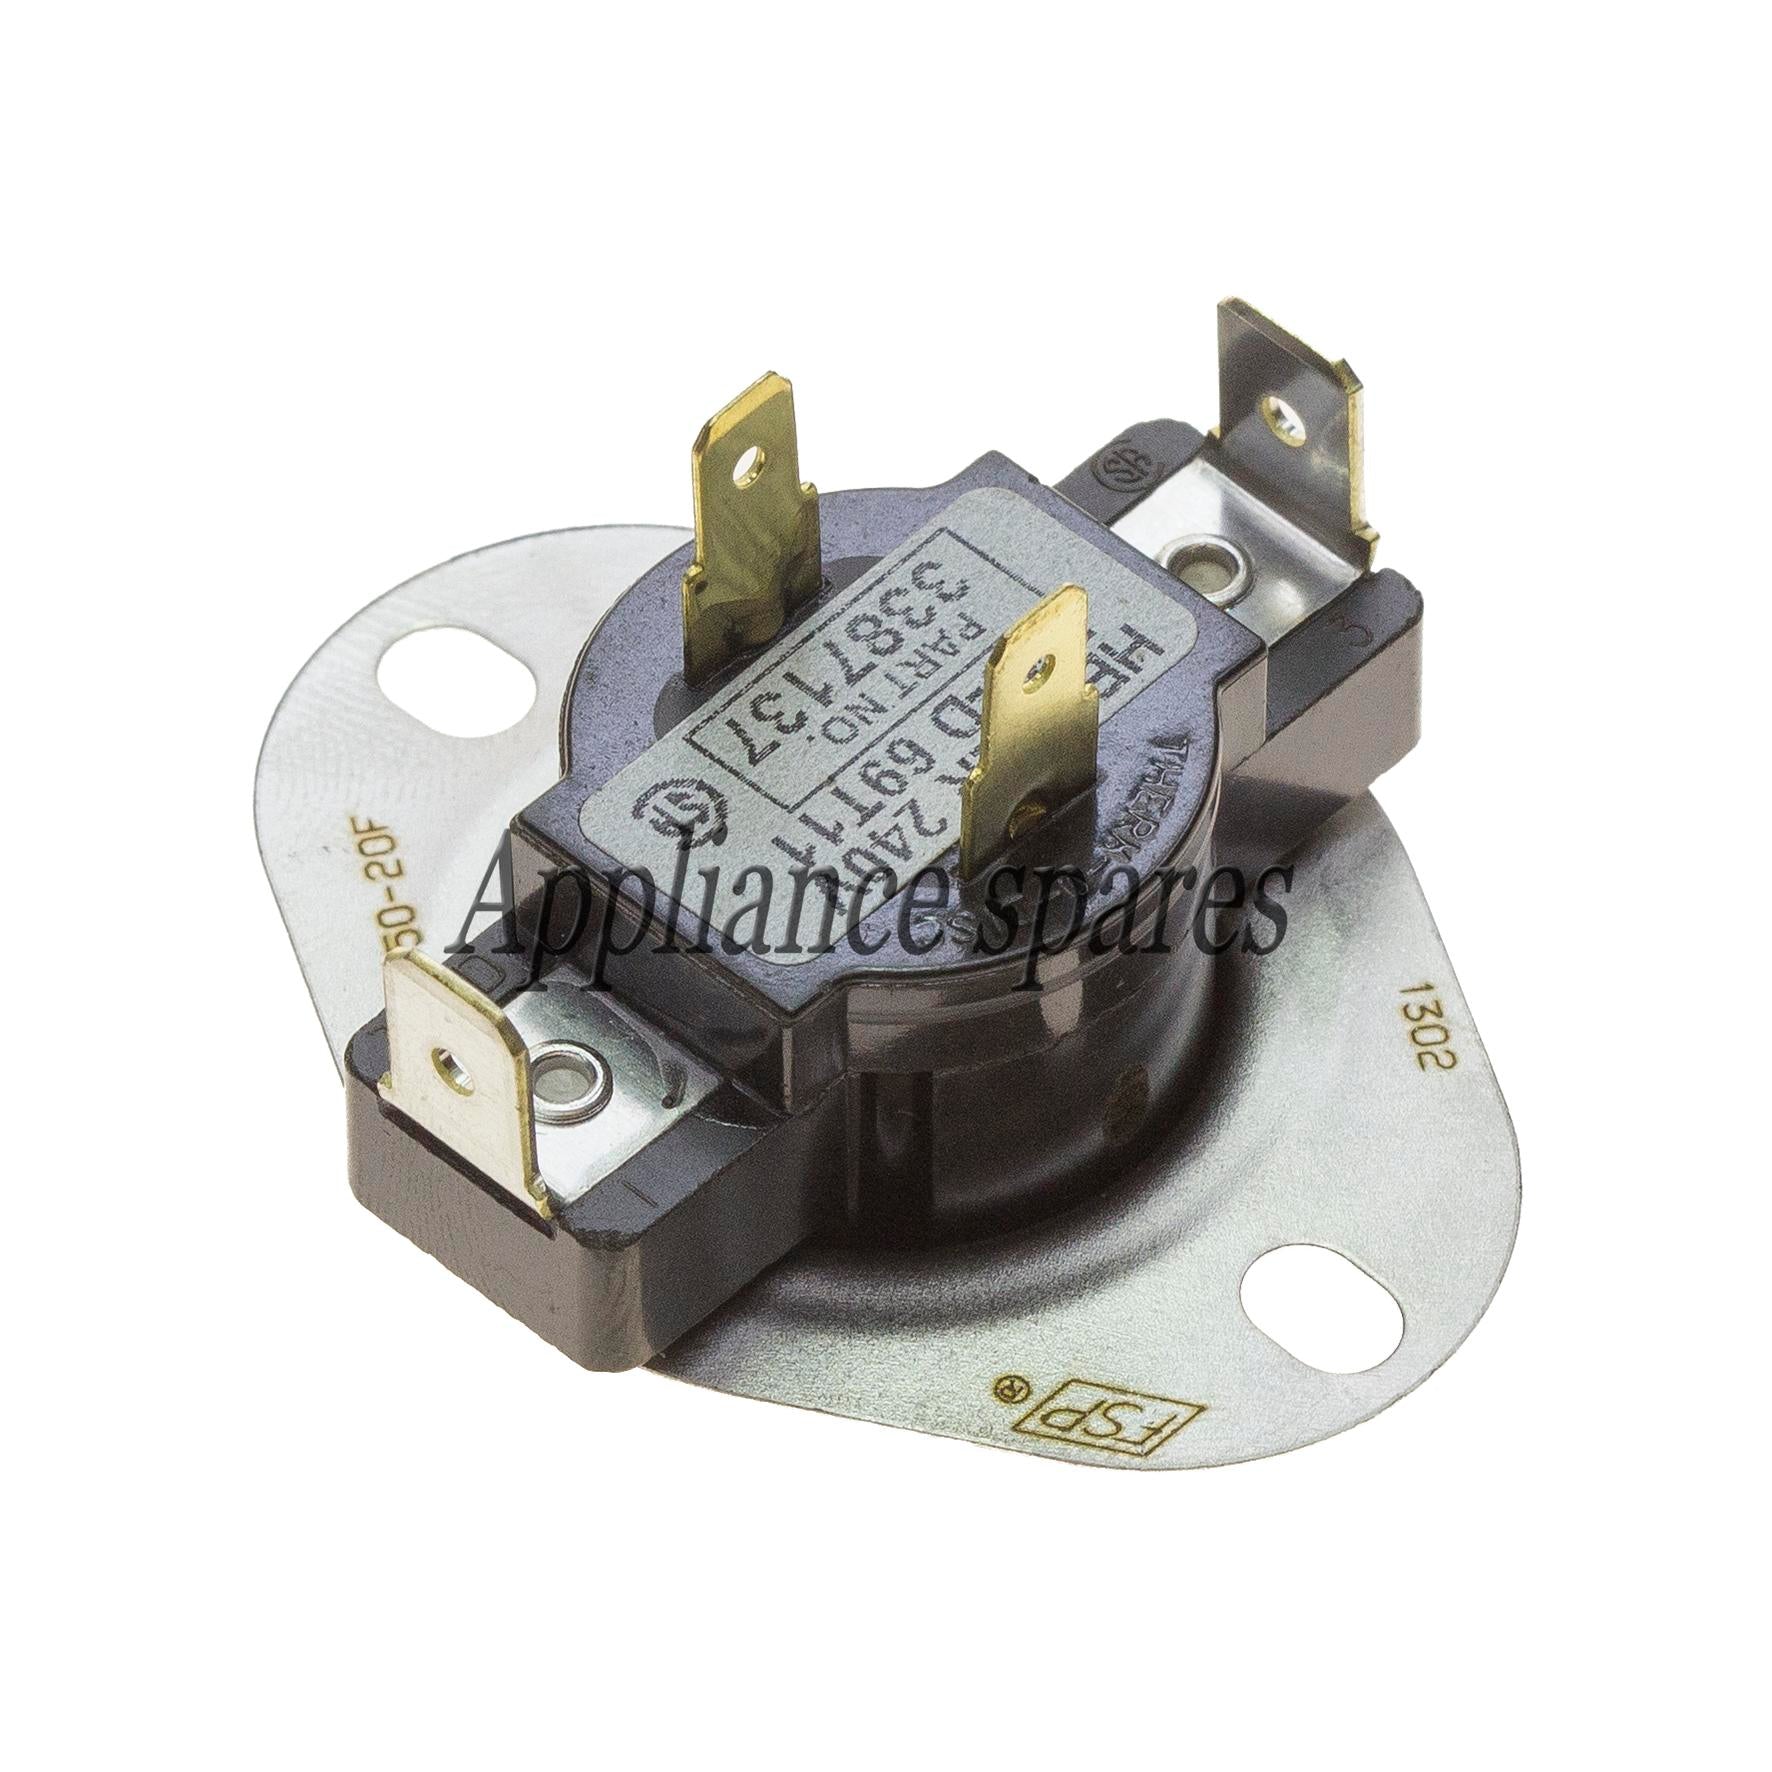 Whirlpool Tumble Dryers Thermostat